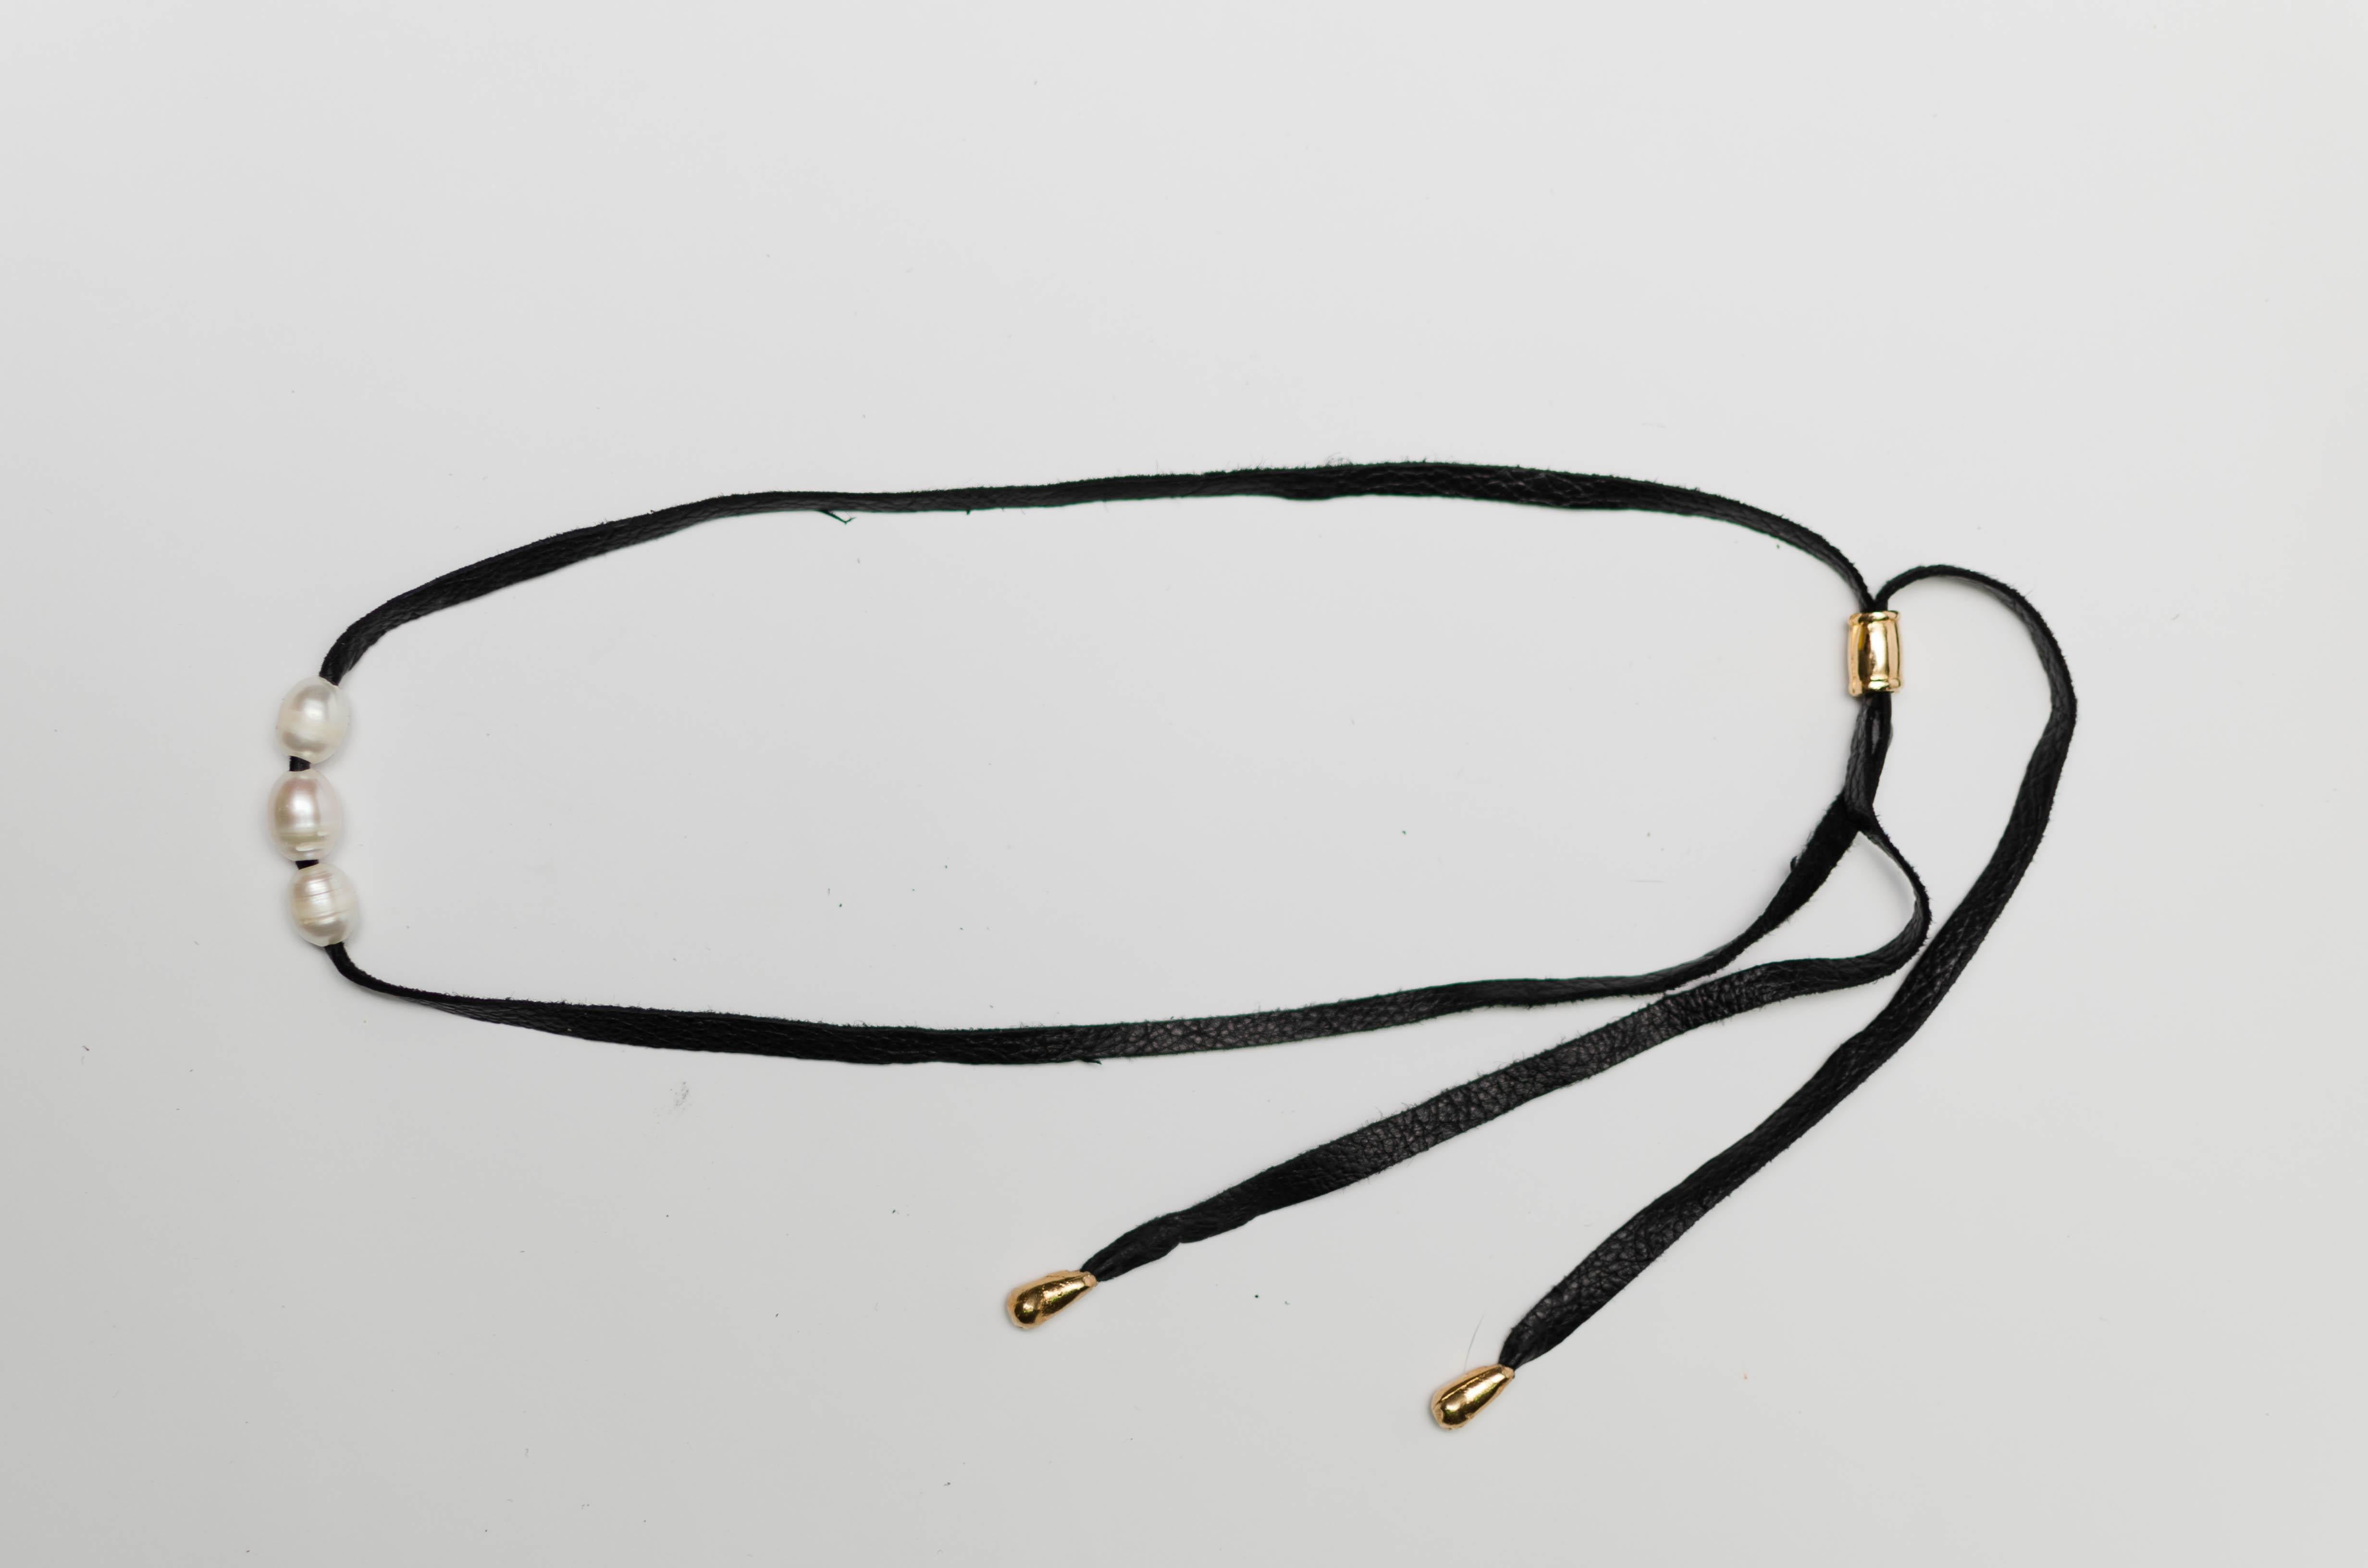 These pieces were designed, hand-carved, and then cast from our workshop in Uruguay.
Delicate necklace with three carefully threaded cultured pearls on a natural leather cord with gold-plated silver terminals. 
All these processes make a truly